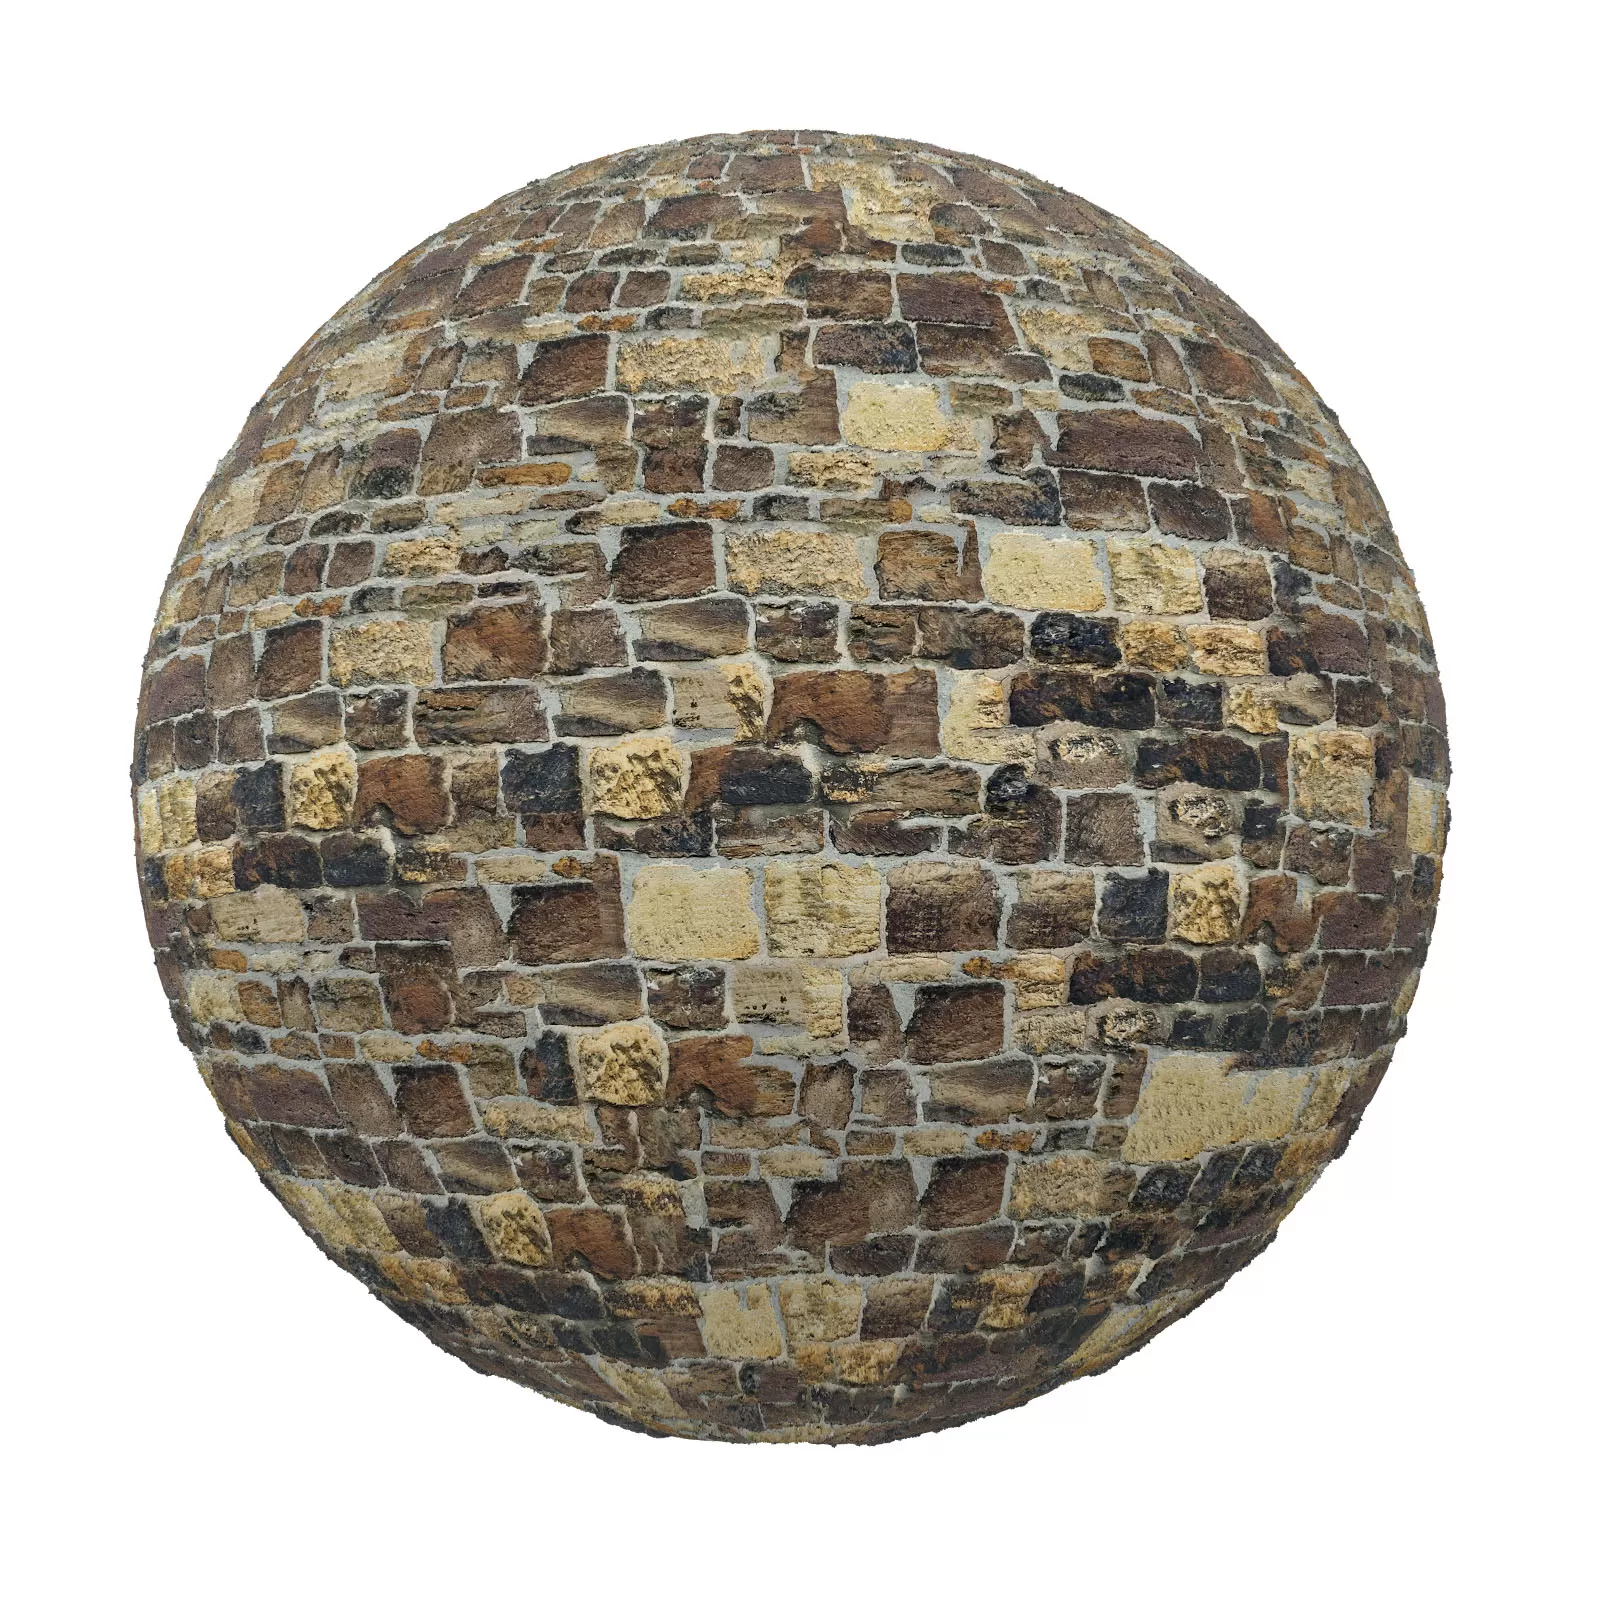 PBR CGAXIS TEXTURES – PAVEMENTS – Stone Pavement 16